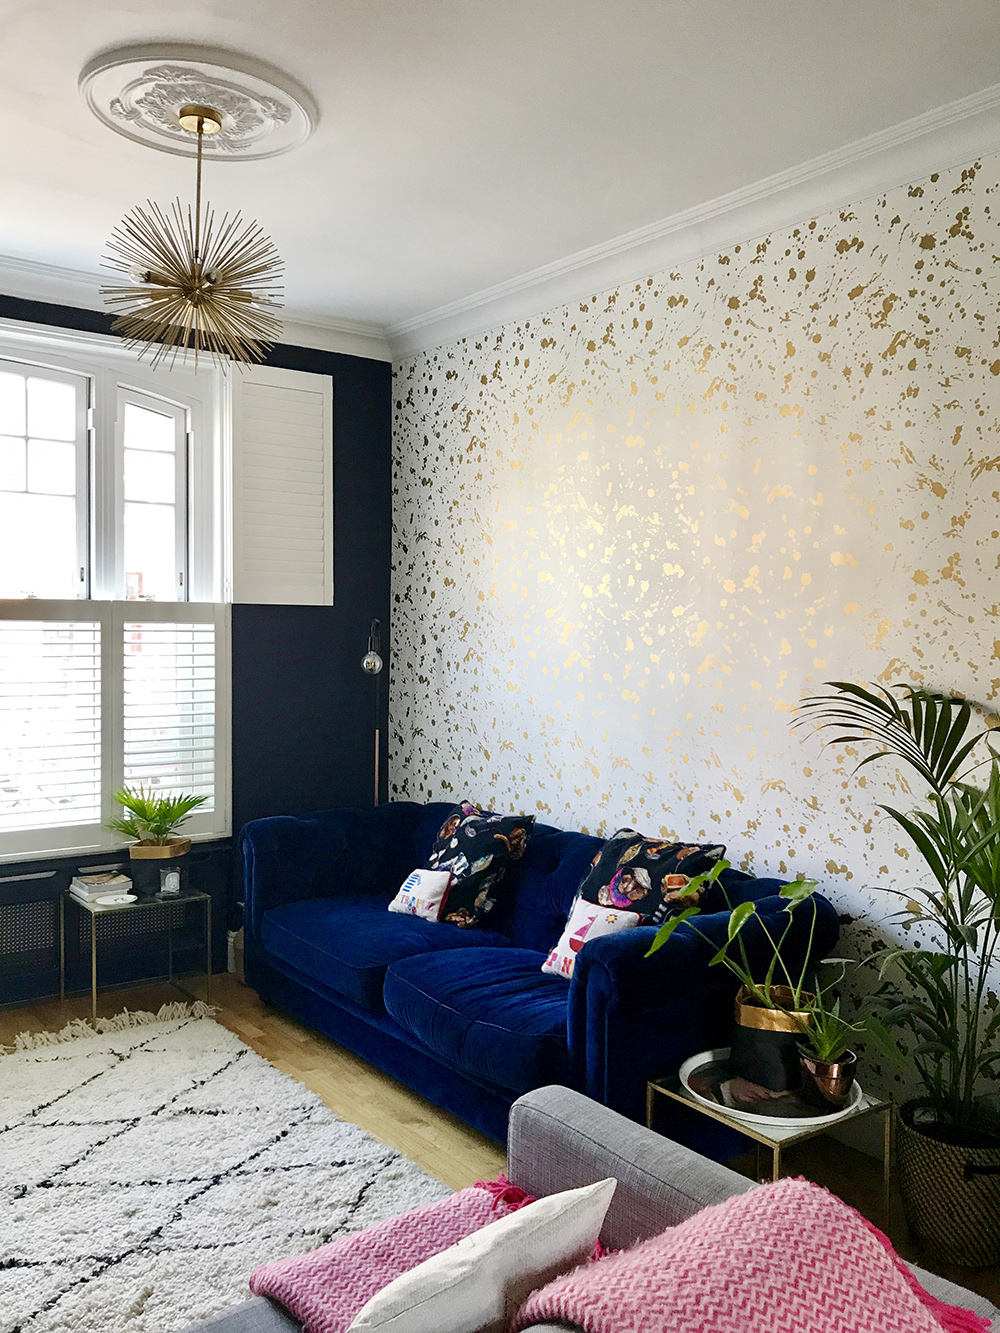 After: Living room transformation. Colourful space with lavish gold details, featuring Gold Drip wallpaper by Jonathan Adler and a luxurious blue velvet sofa.